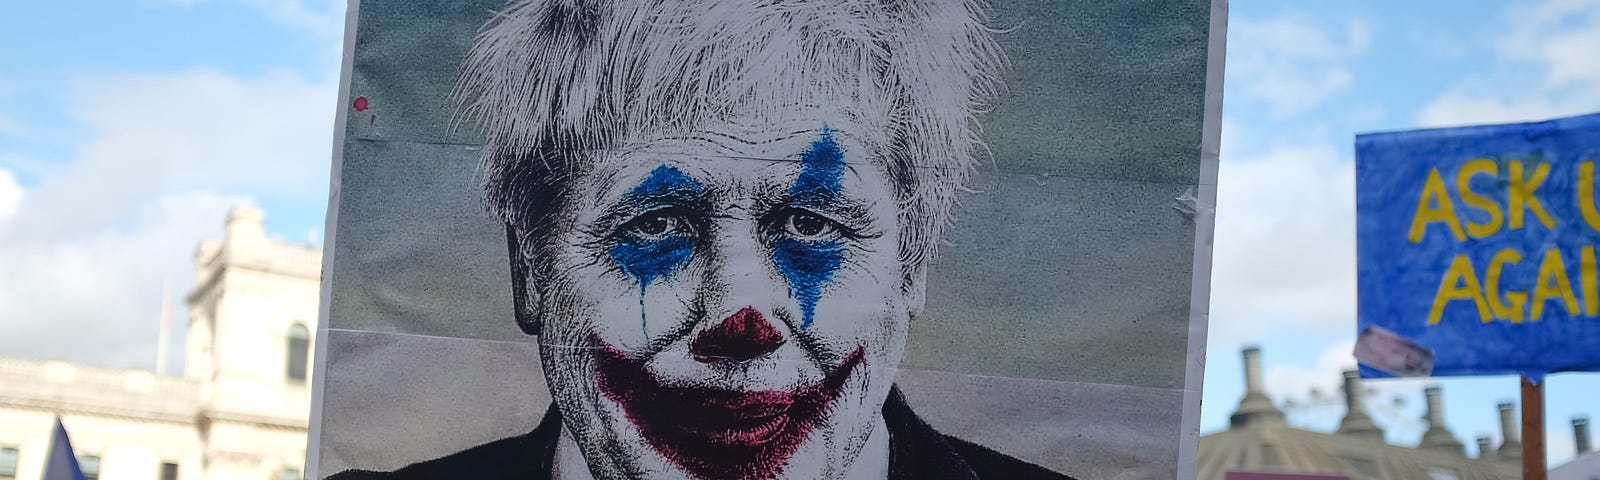 A protestor is carrying a painting of the ex-UK prime minister, Boris Johnson painted as a clown.